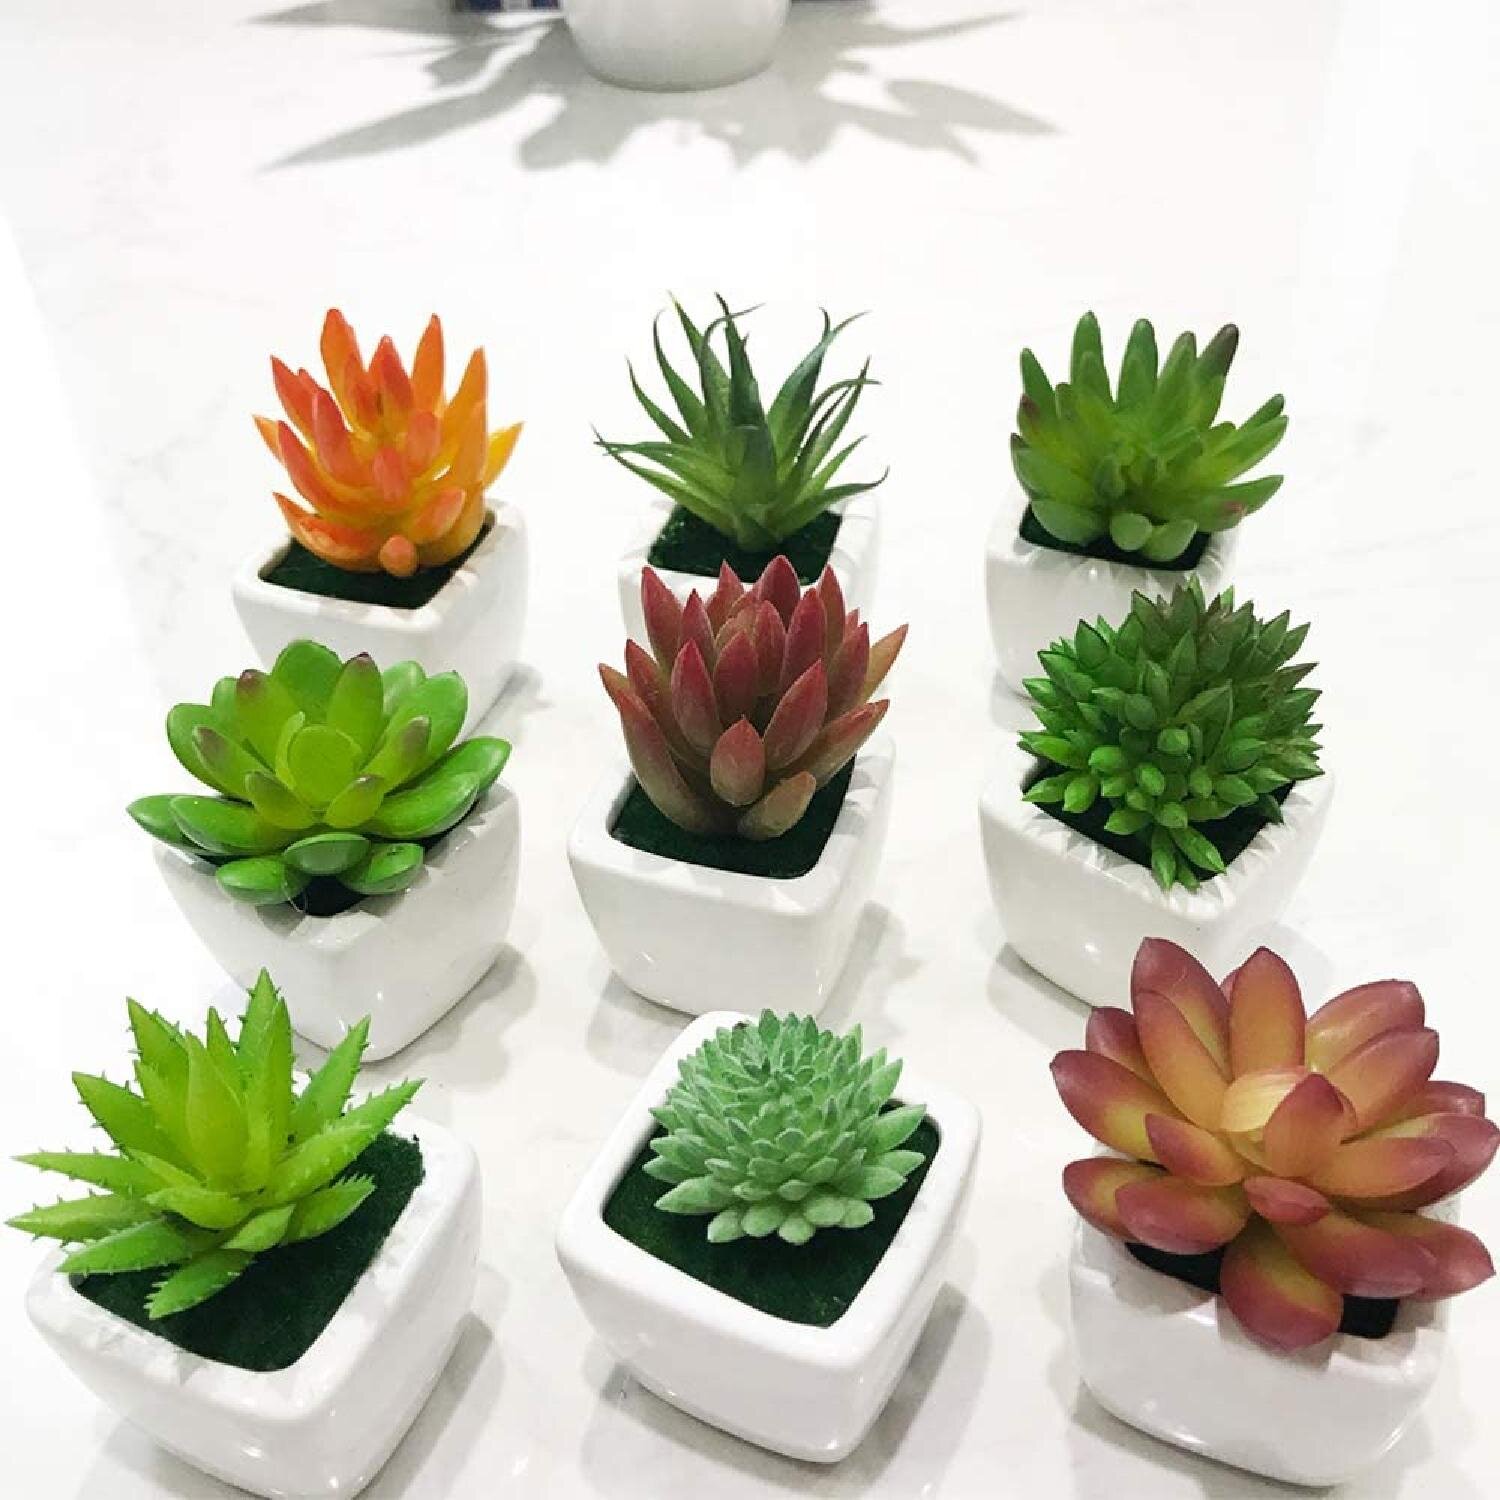 Artificial Fake Succulents Plants Mini 2 Blooming Cactus 2 Flowers Set of 4